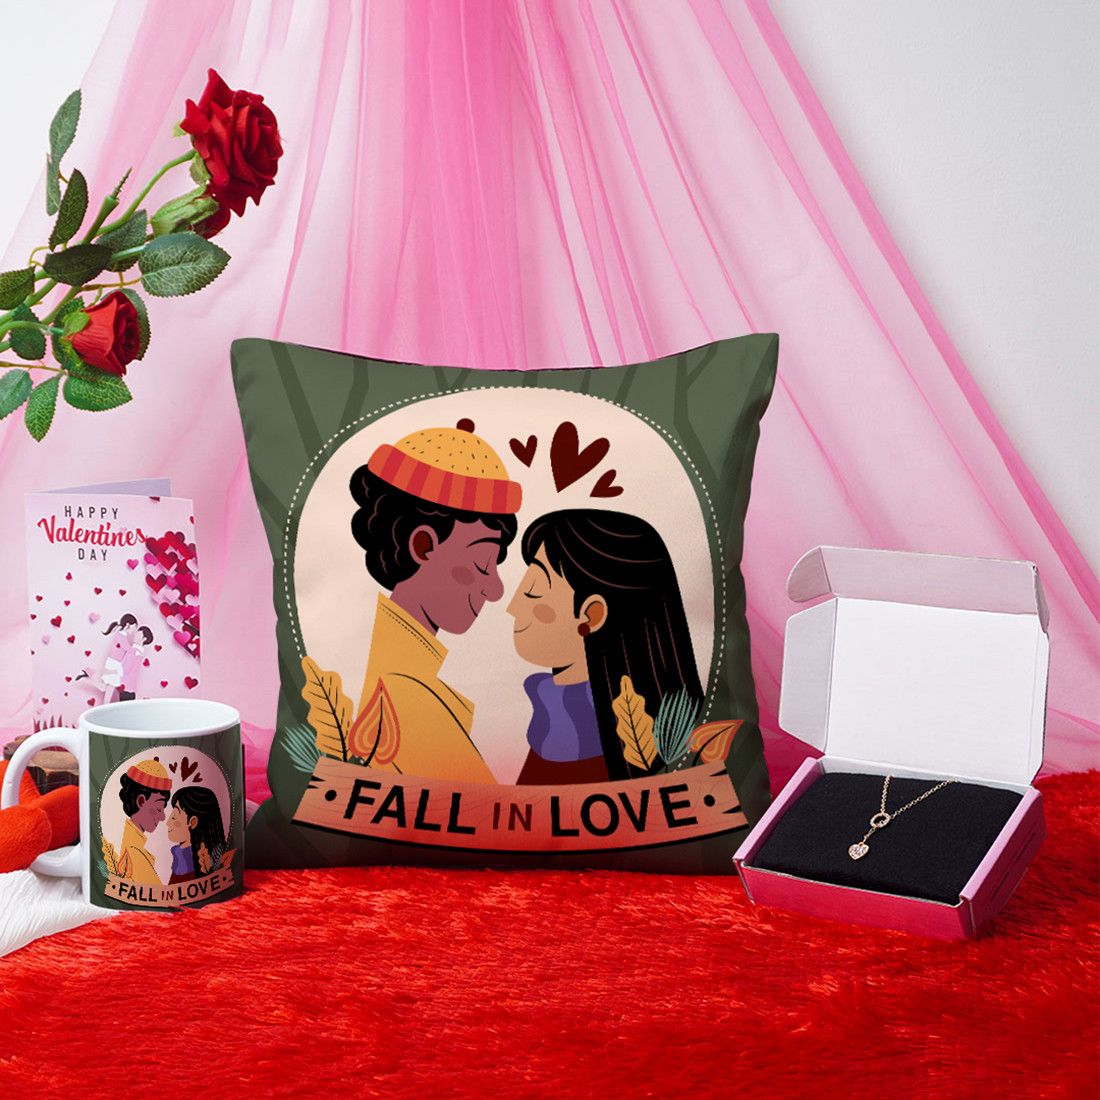 Valentine's Day Gifts for Wife/Girlfriend - Gifts By Rashi